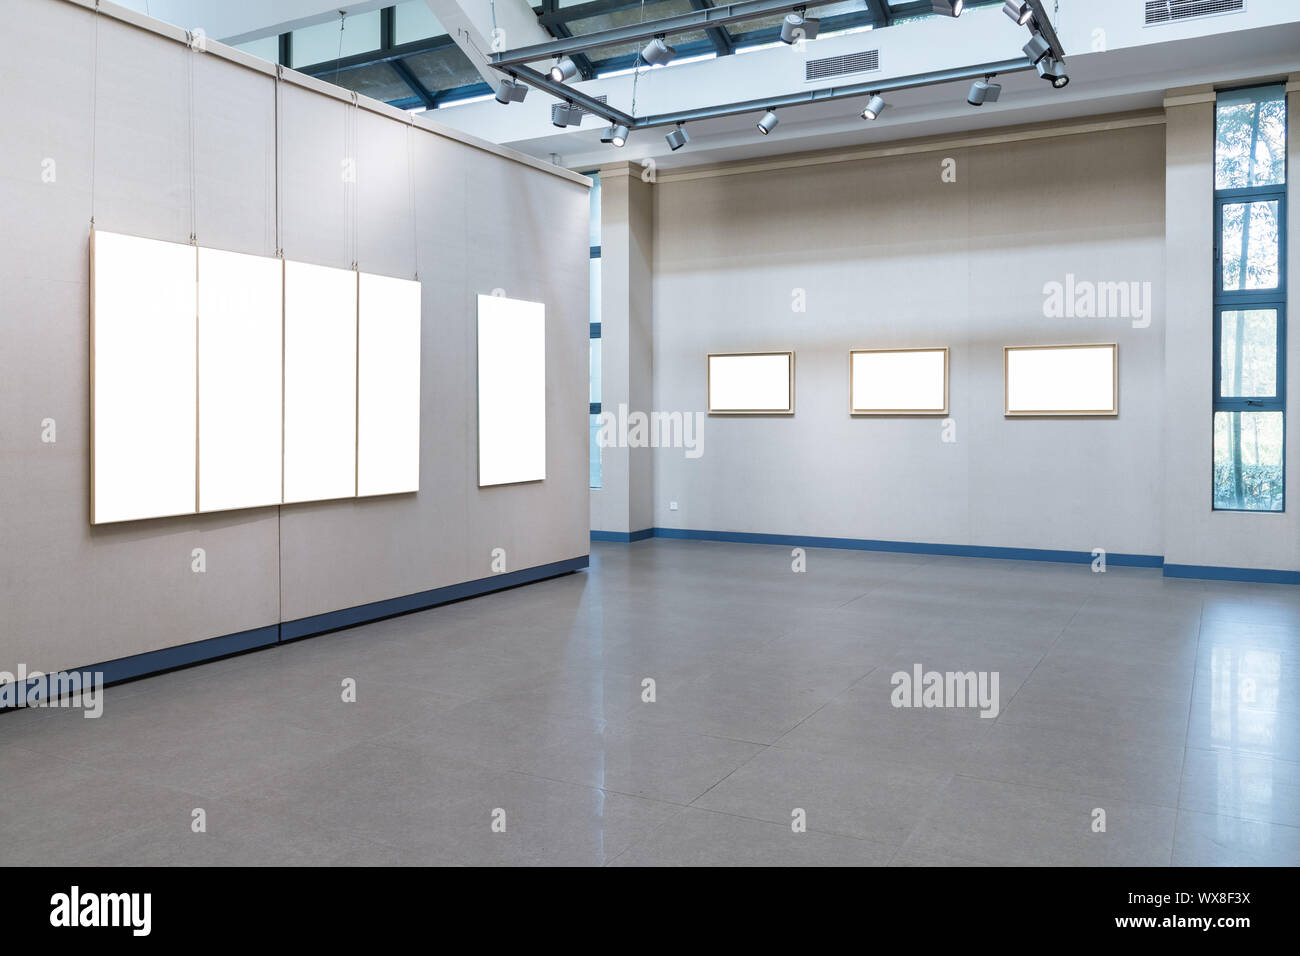 blank picture frames on exhibition wall Stock Photo